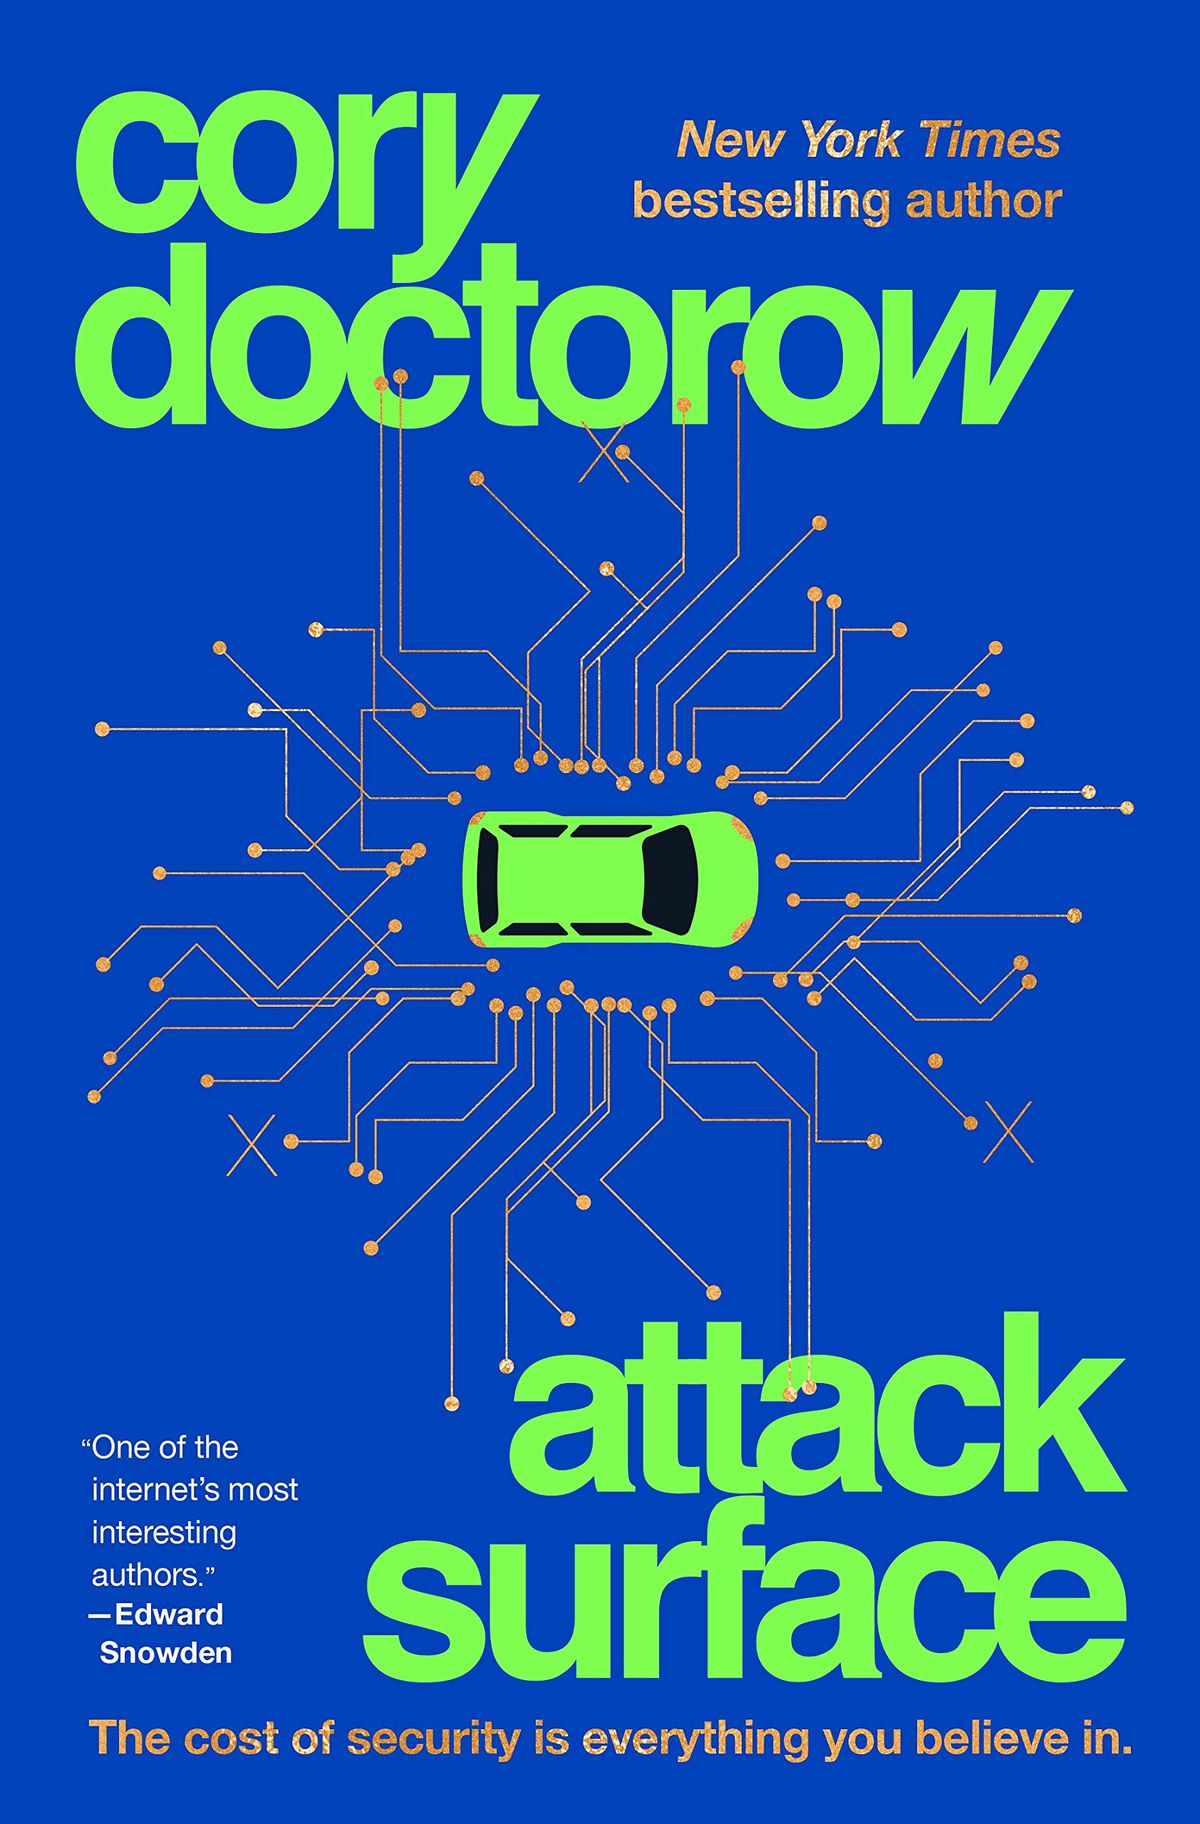 The cover of Cory Doctorow’s novel Attack Surface